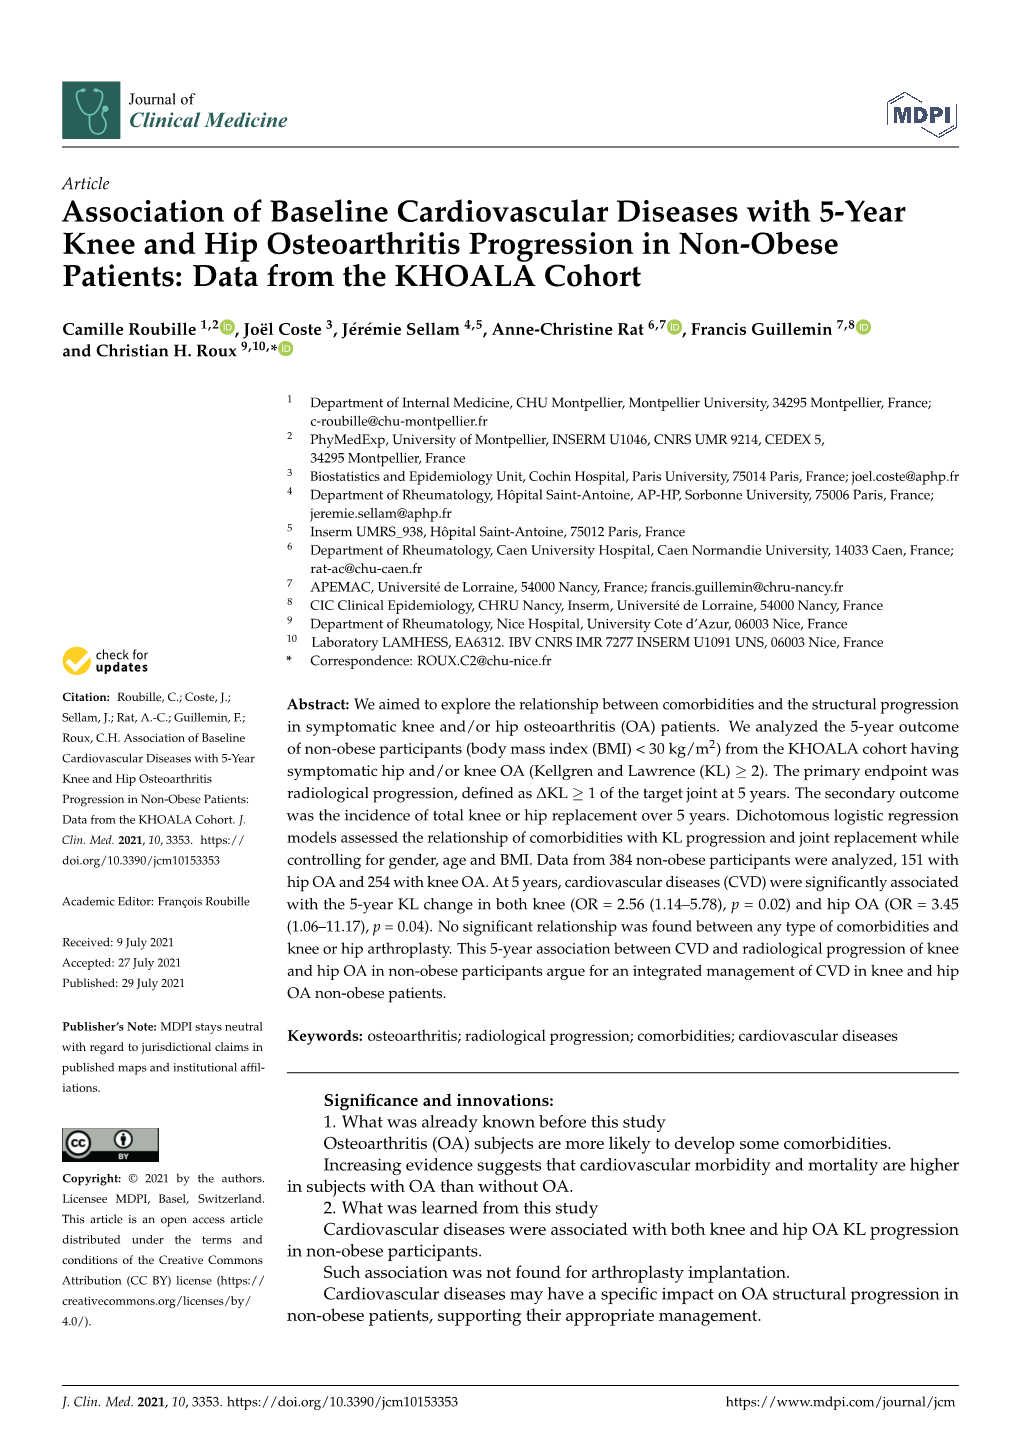 Association of Baseline Cardiovascular Diseases with 5-Year Knee and Hip Osteoarthritis Progression in Non-Obese Patients: Data from the KHOALA Cohort